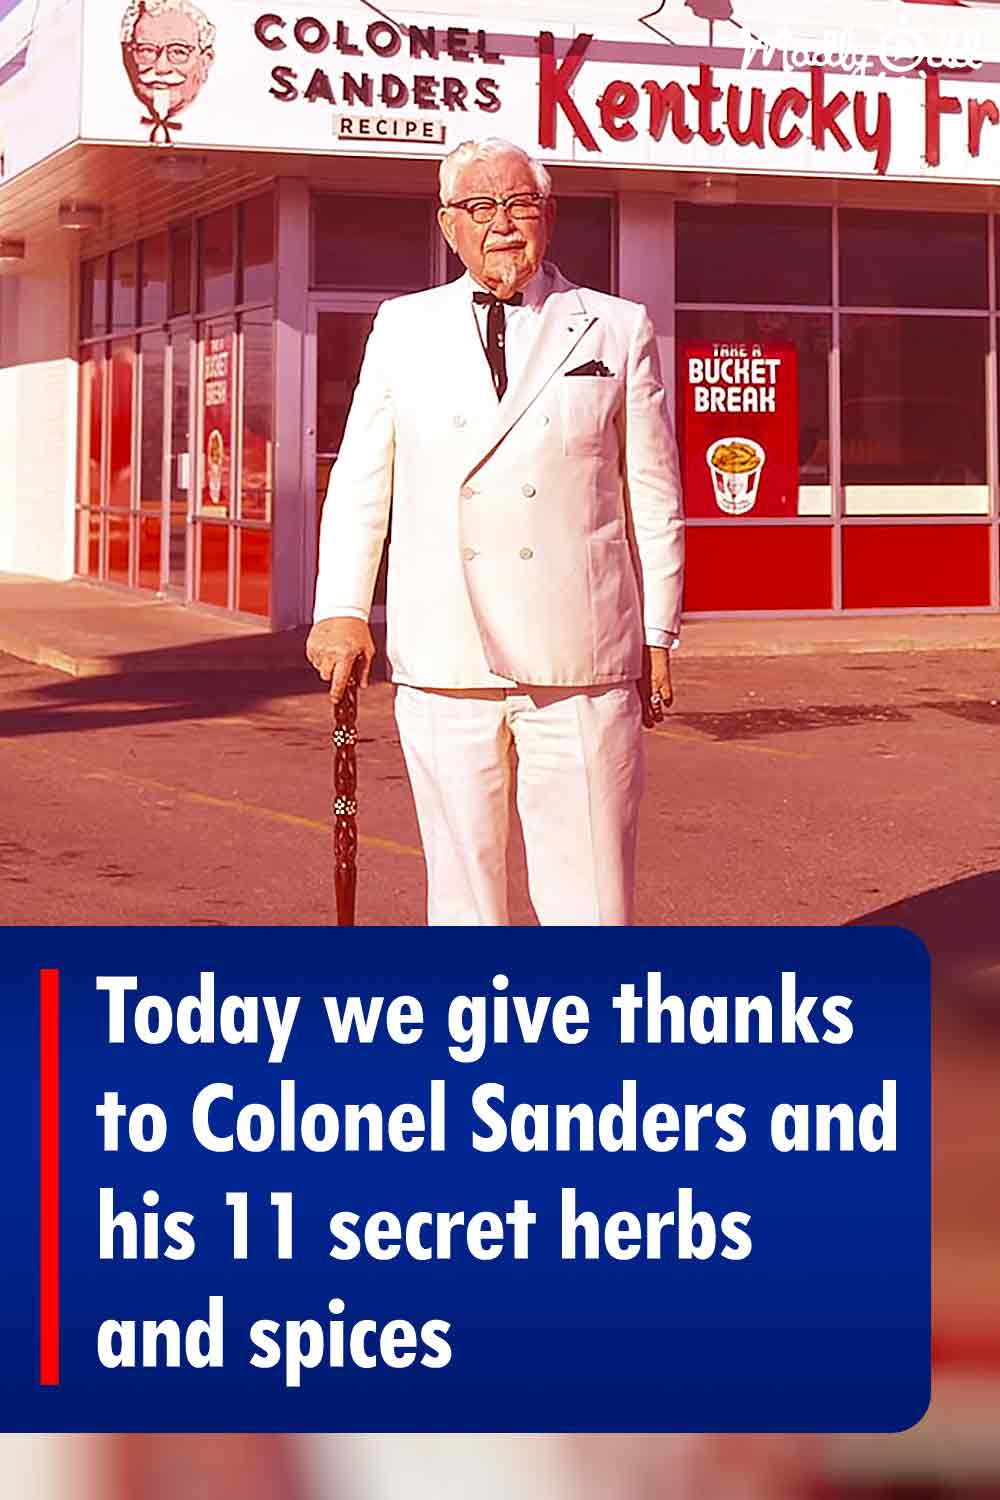 Today we give thanks to Colonel Sanders and his 11 secret herbs and spices